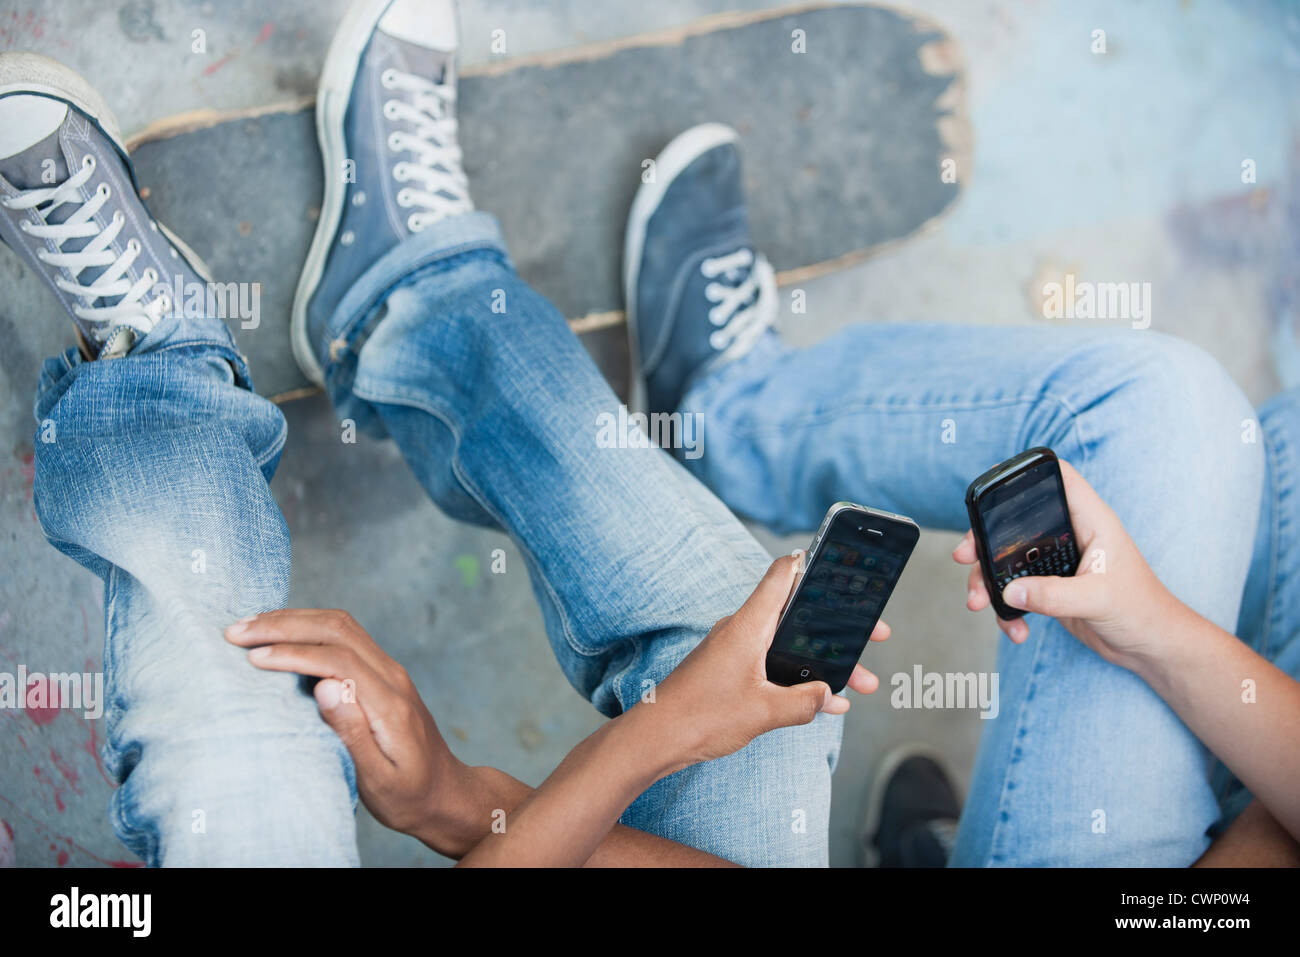 Young men using cell phones, cropped Stock Photo